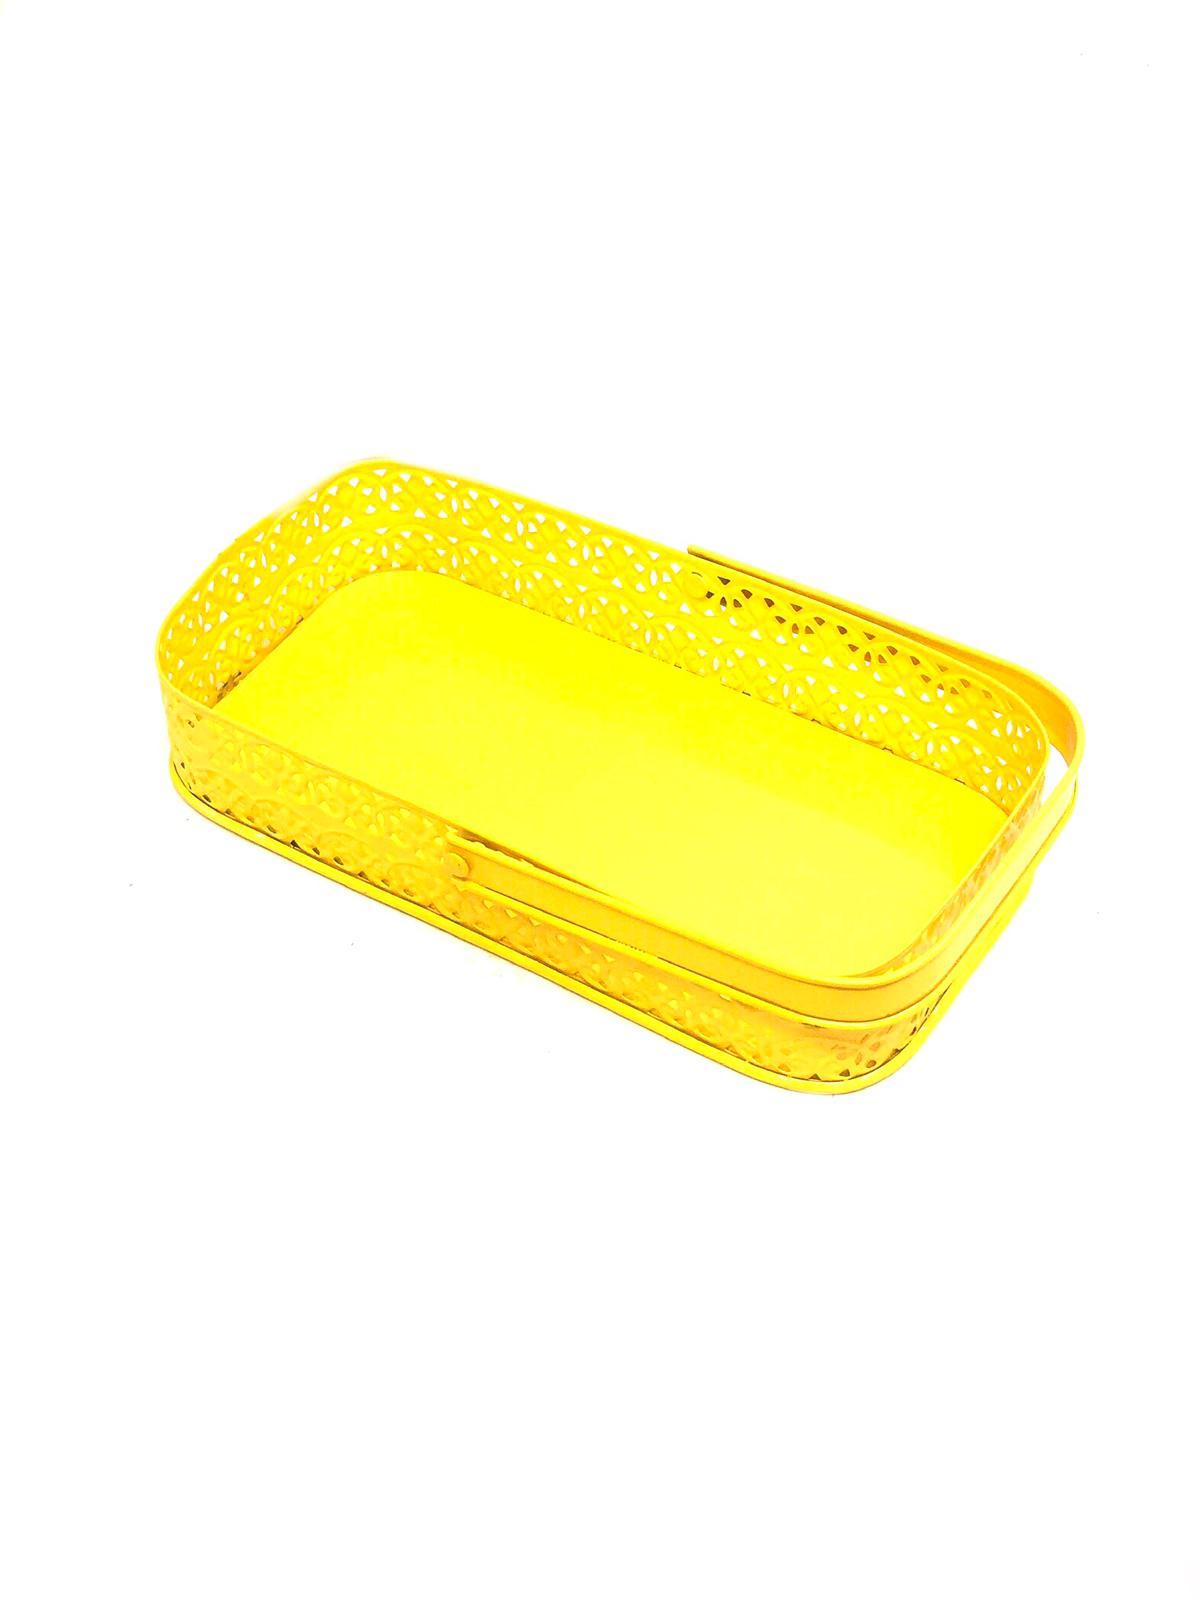 Metal Tray With Carry Handle Designed For Jar & Storage Needs By Tamrapatra